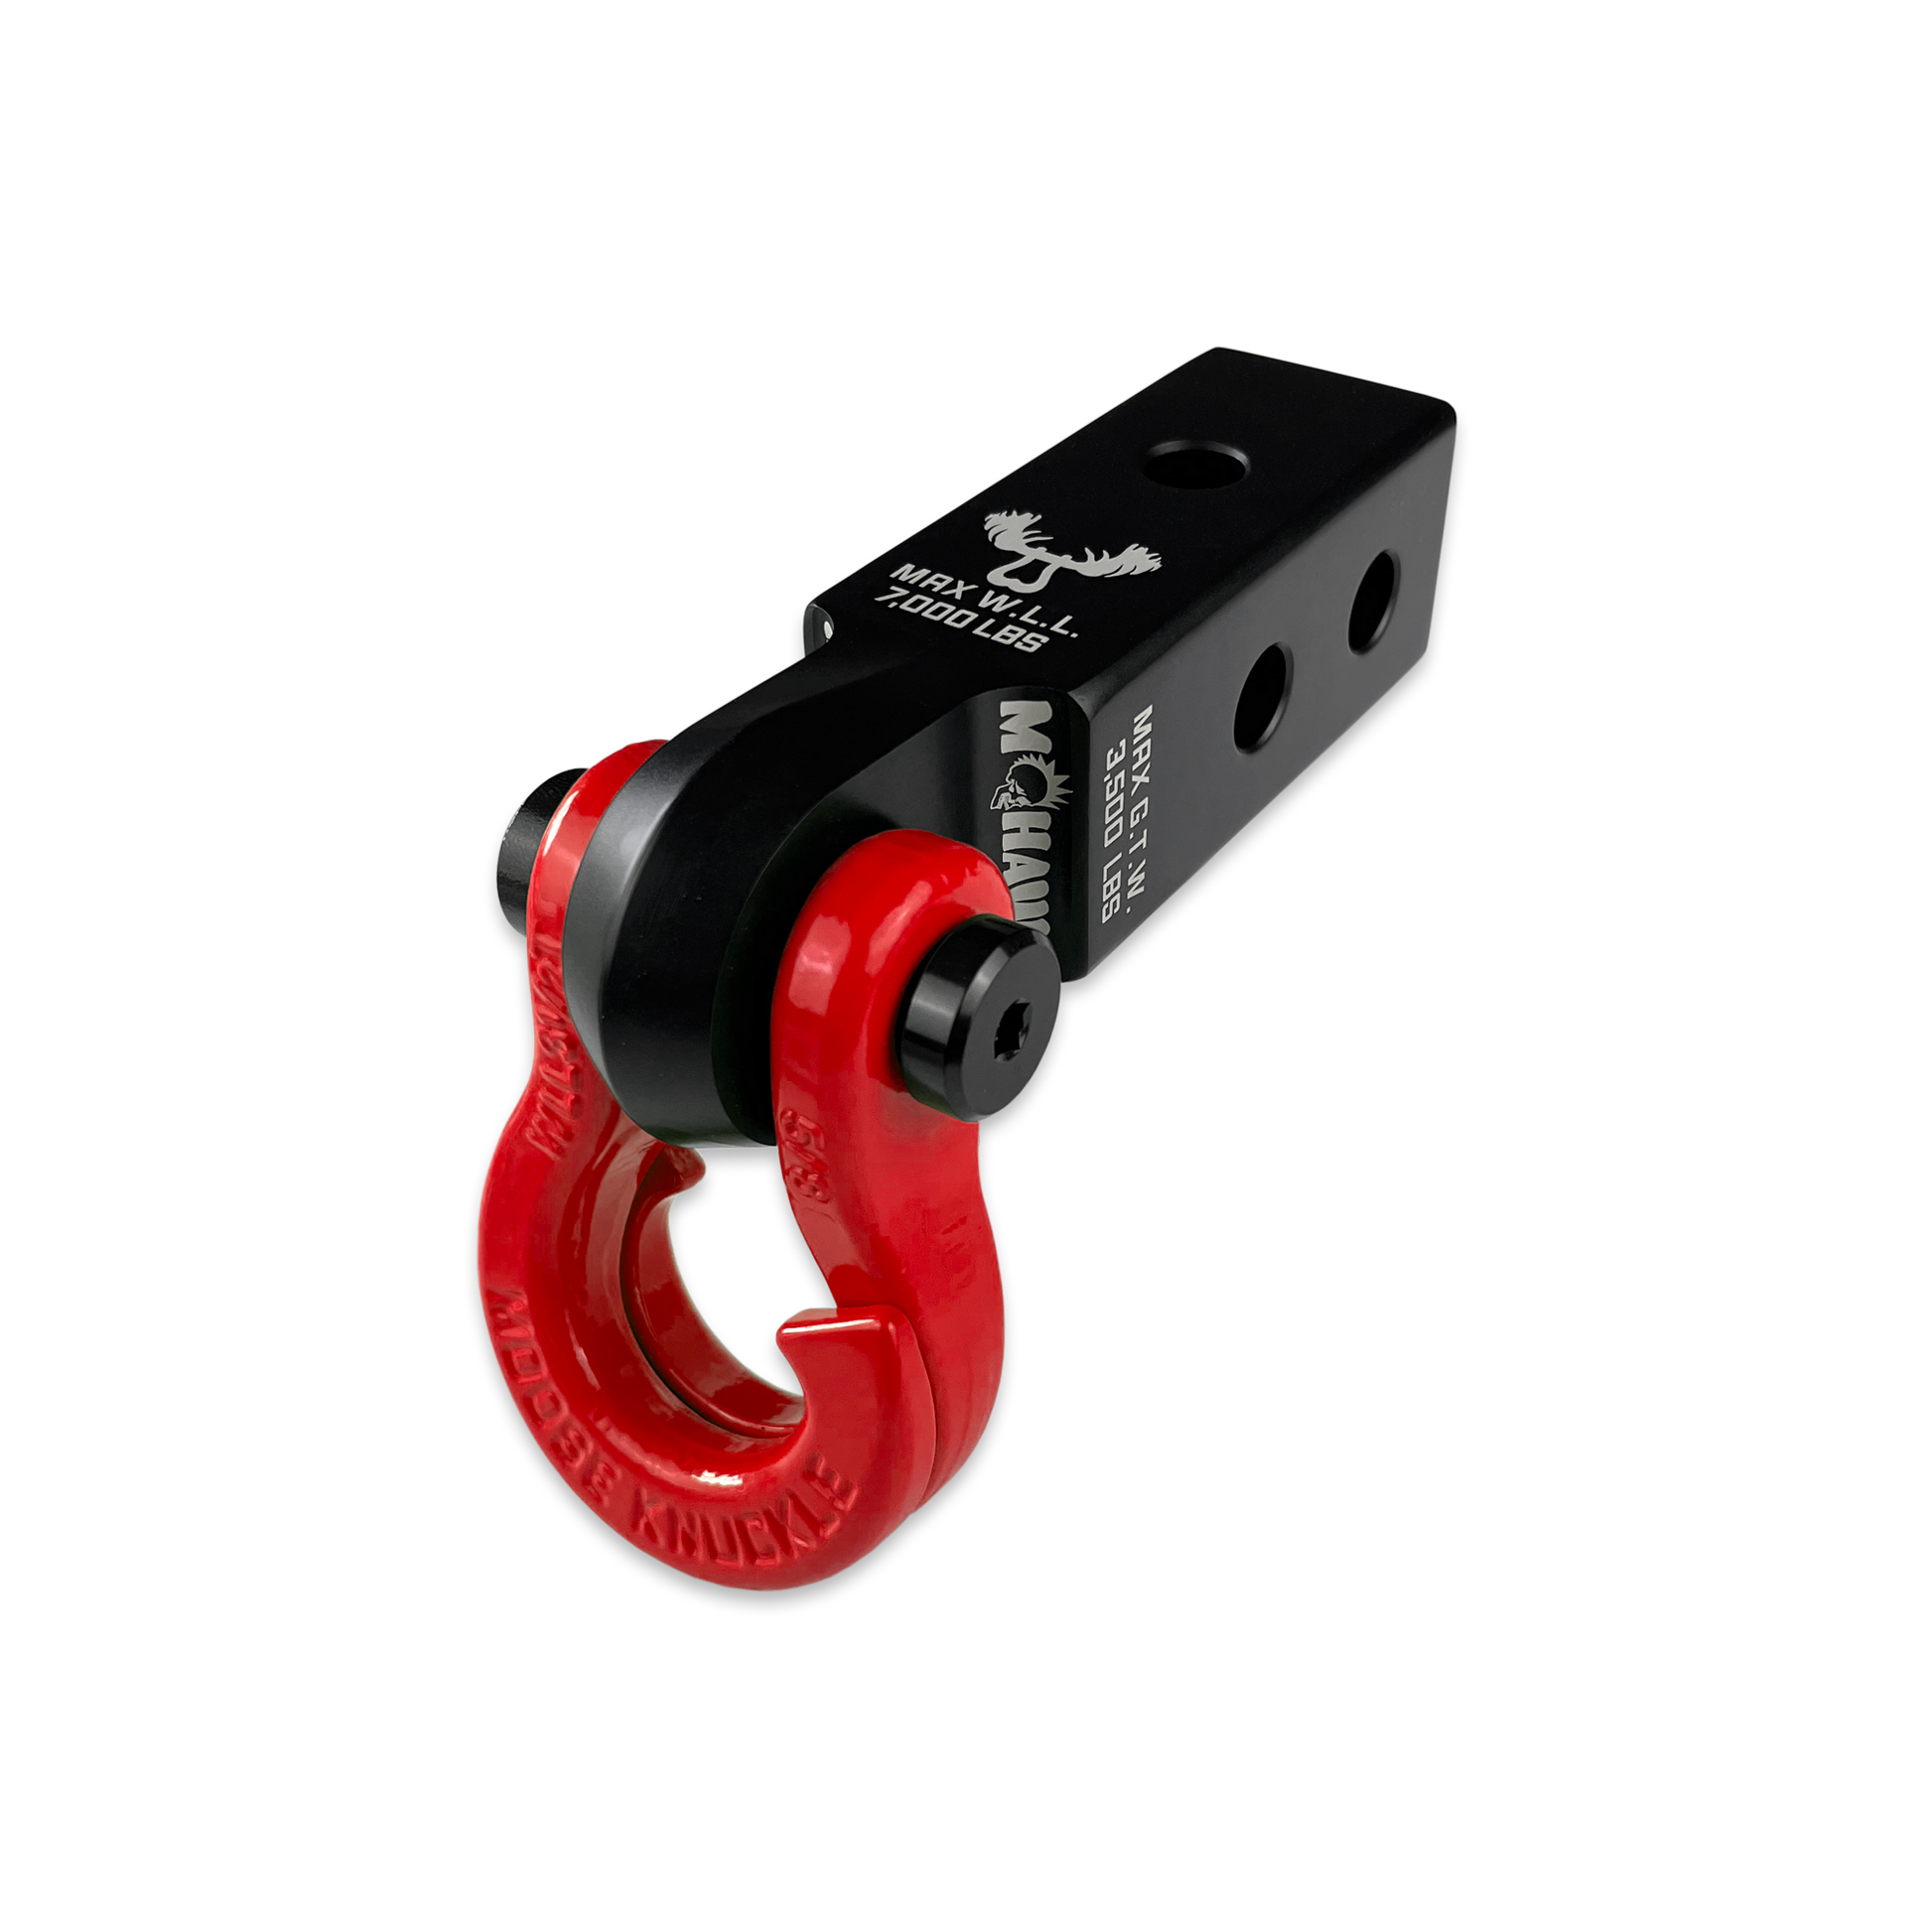 Jowl 5/8 Split Shackle & Mohawk 2.0 X 5/8 Receiver (Black Lung and Flame Red)